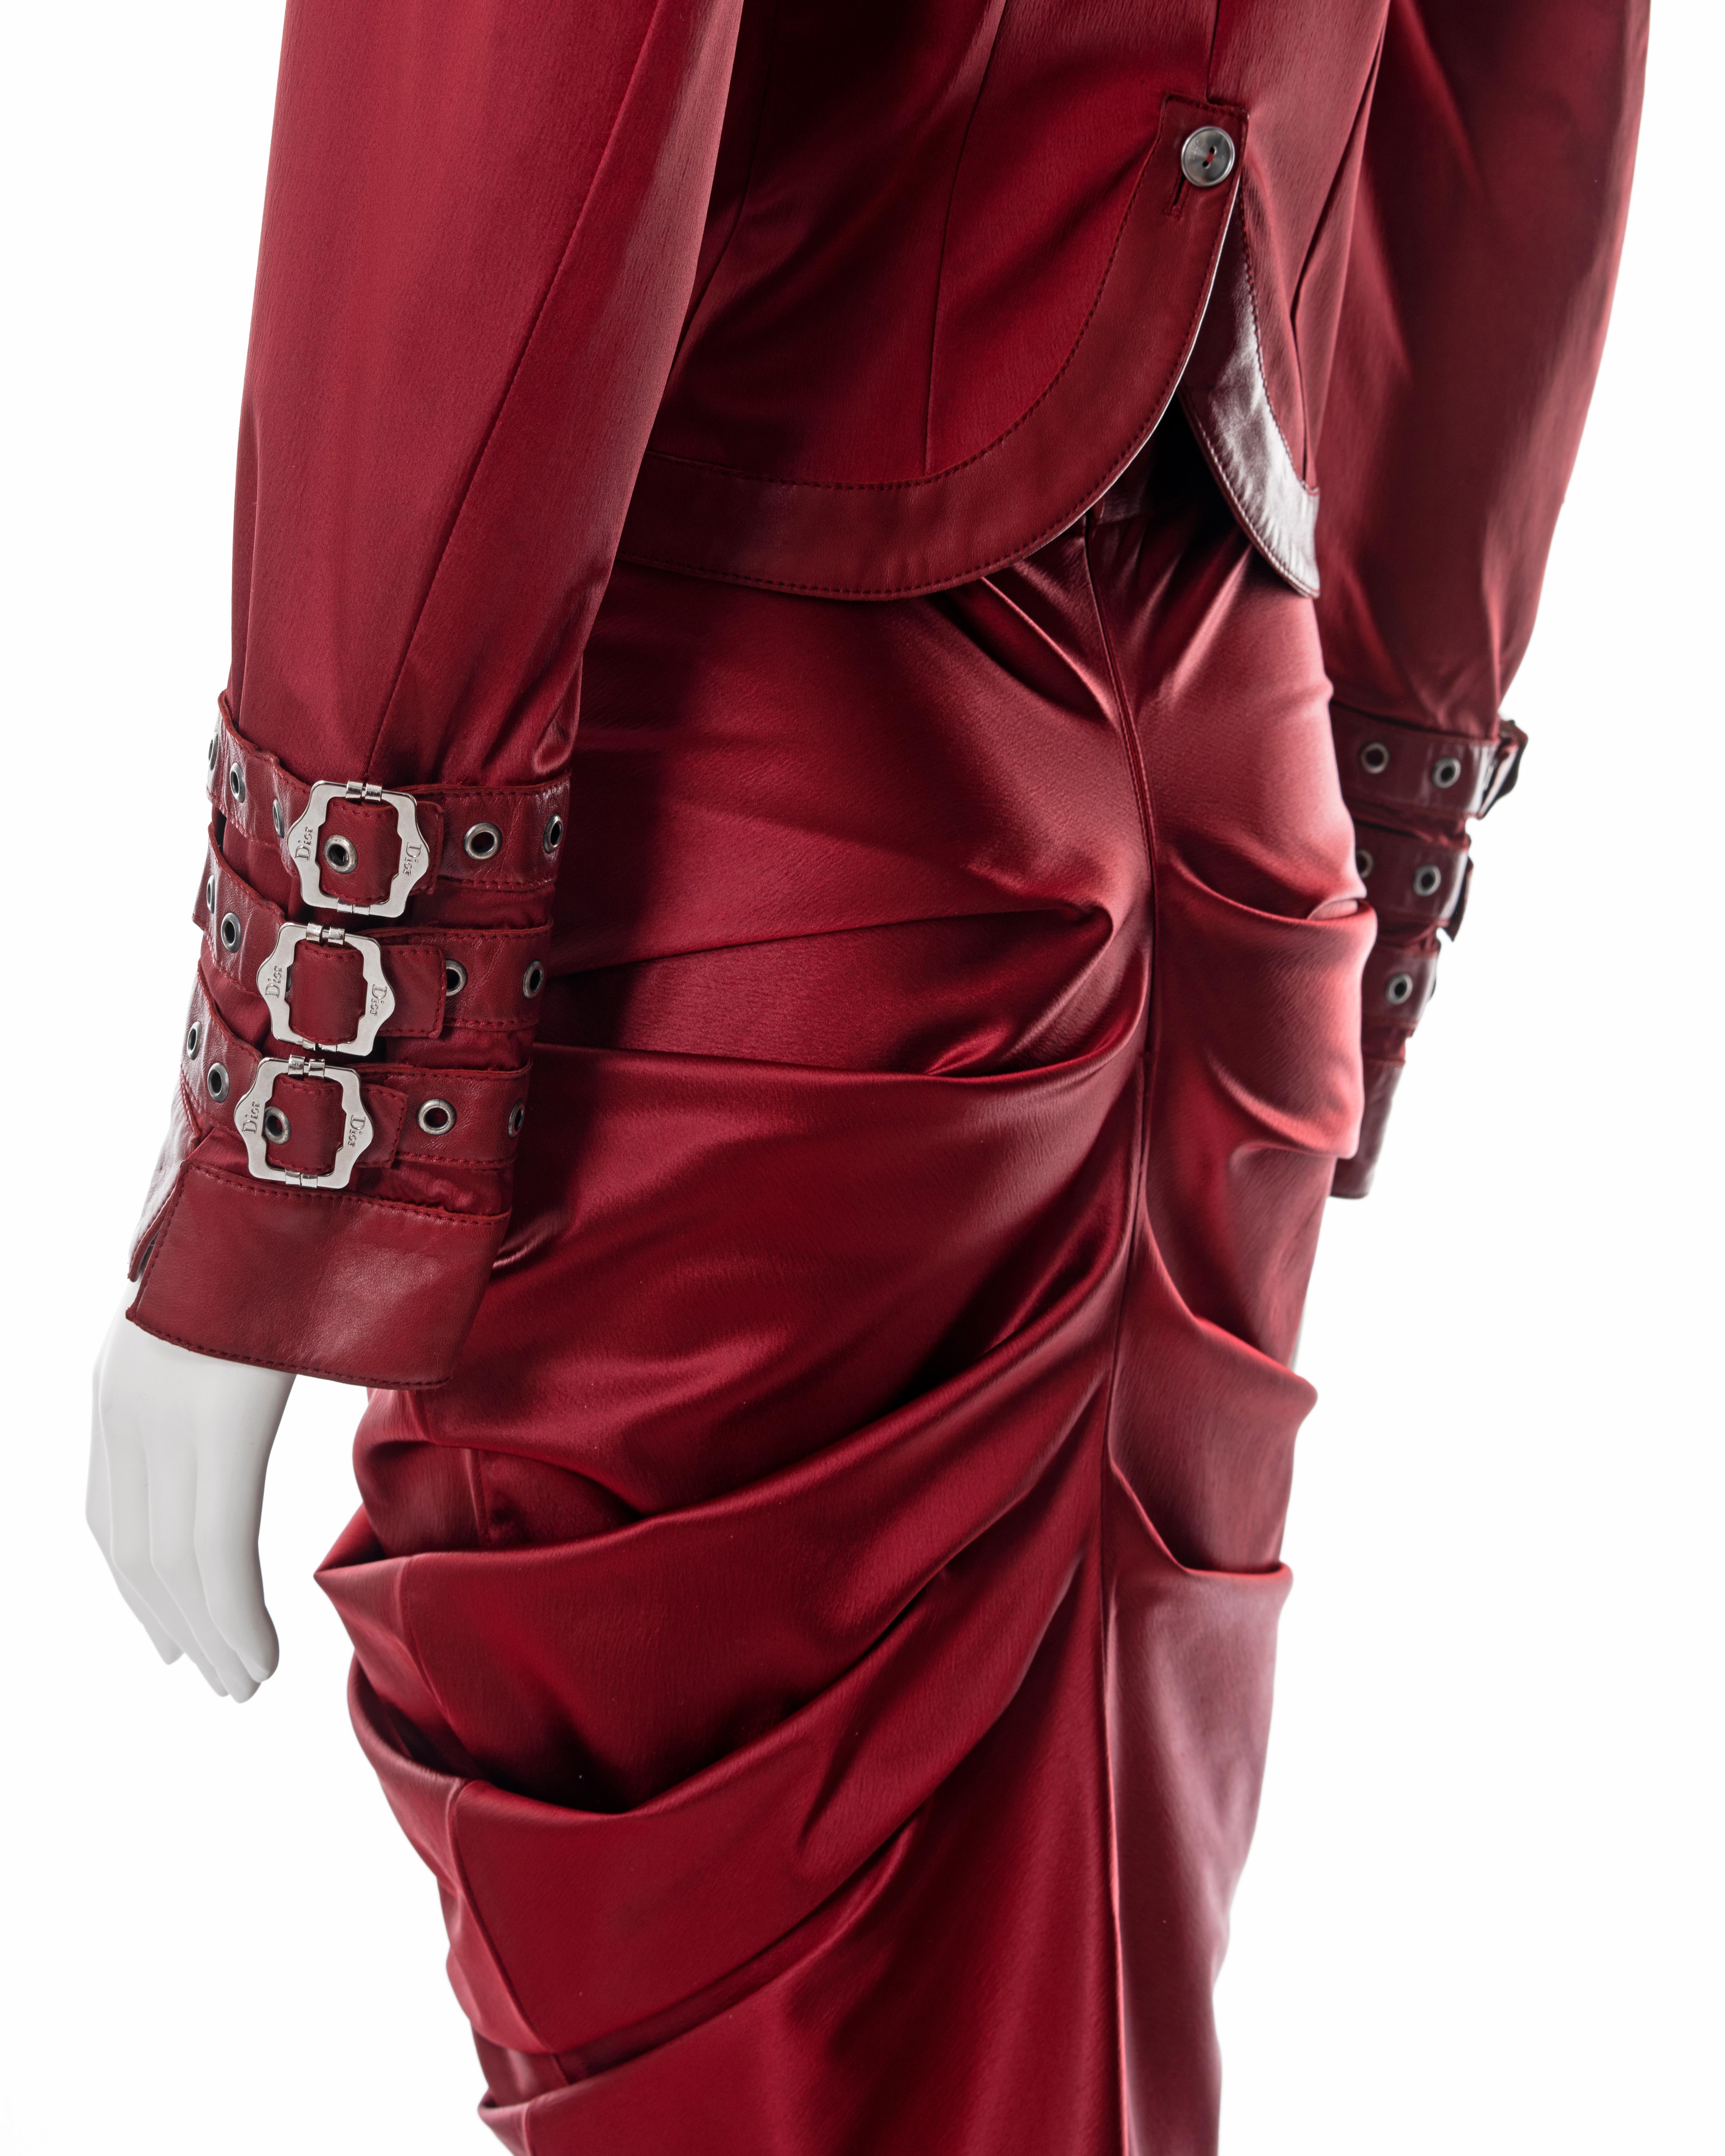 Christian Dior by John Galliano red satin and leather skirt suit, fw 2003 For Sale 5